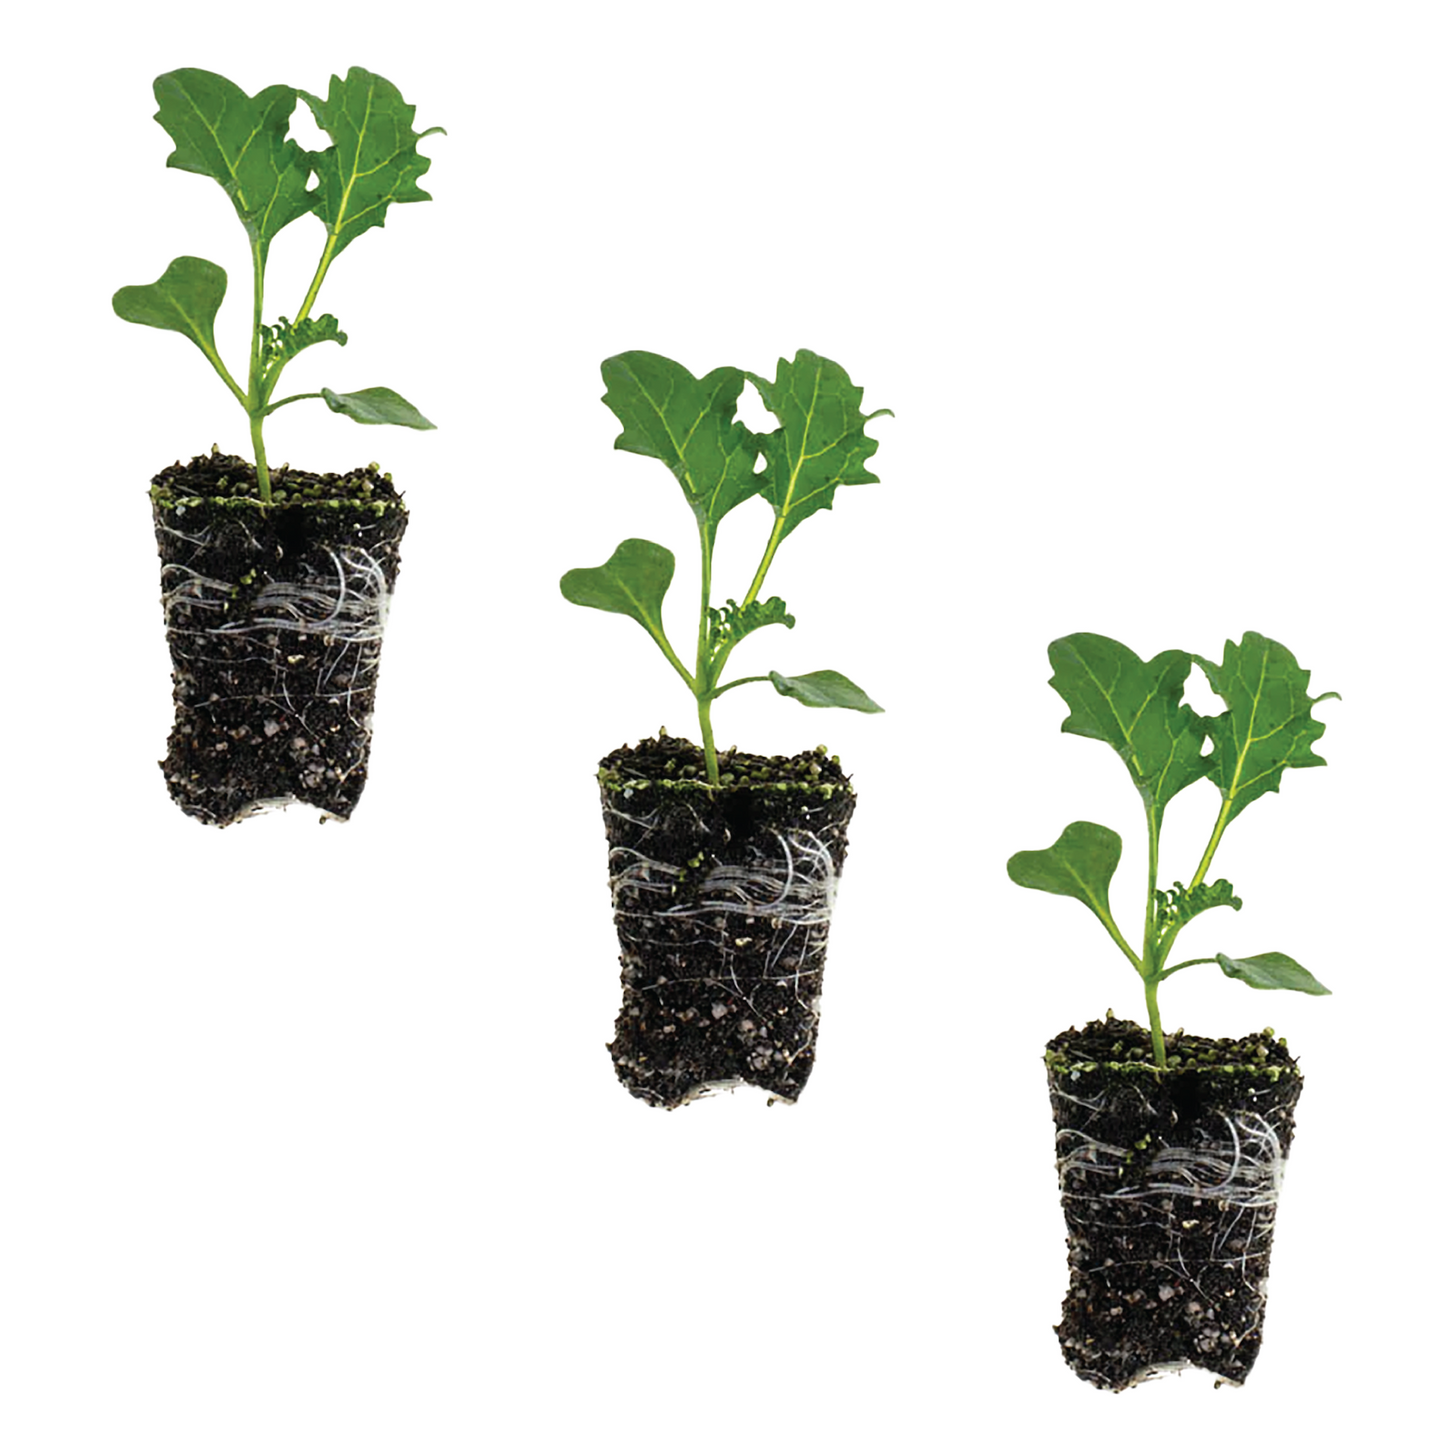 Kale Scotch Blue Curled Plantlings Live Baby Plants 1-3in., 3-Pack